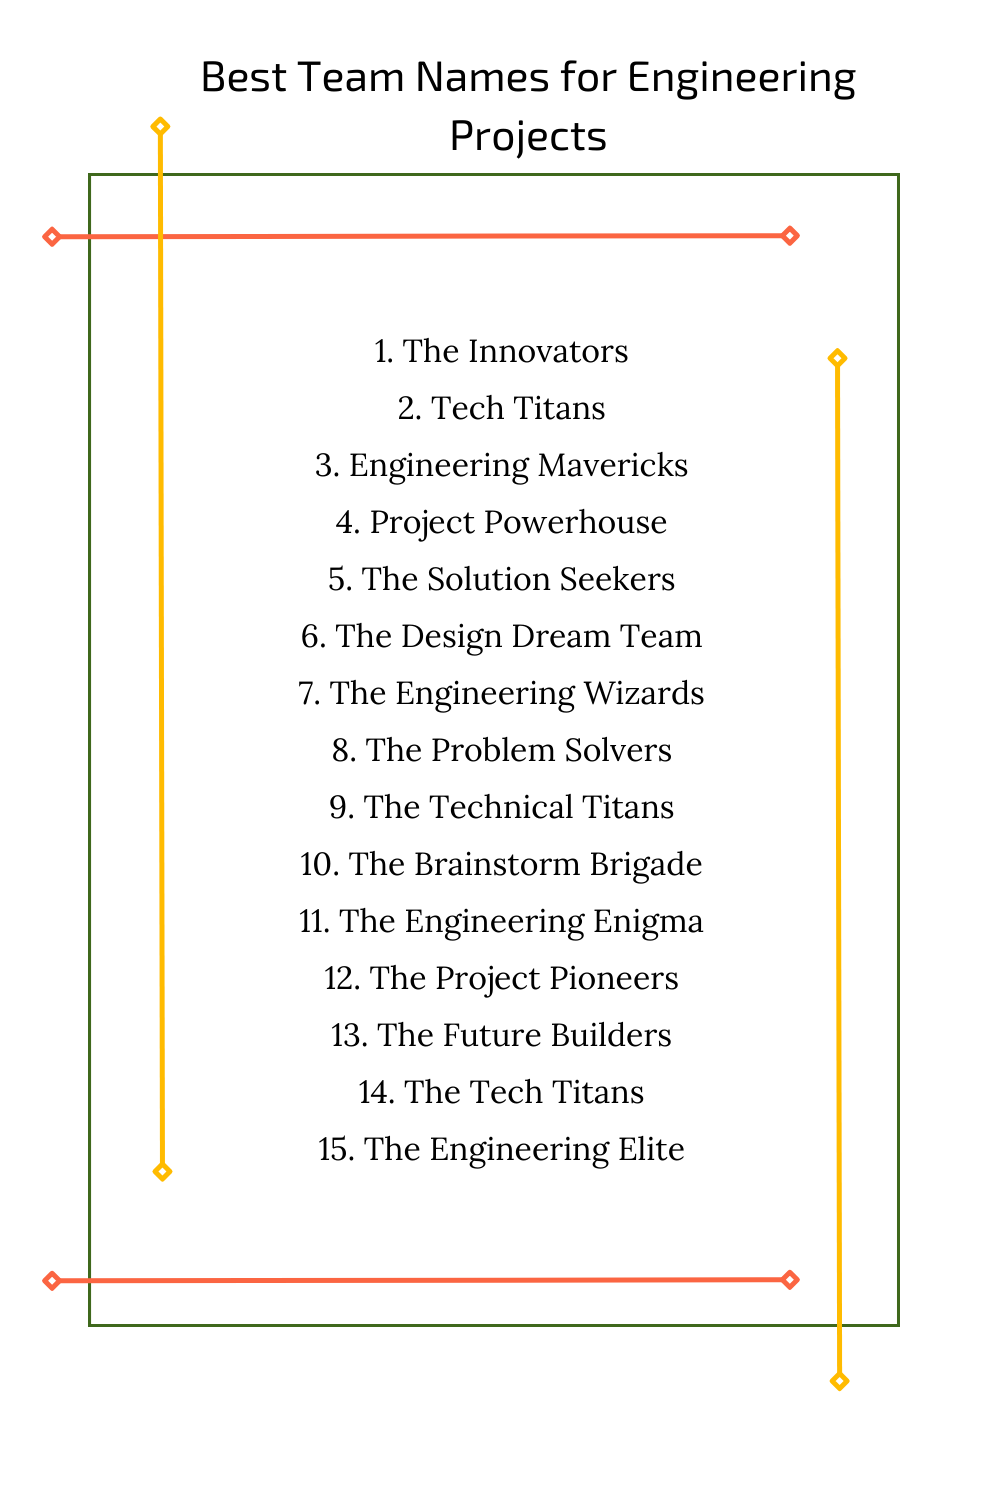 Best Team Names for Engineering Projects